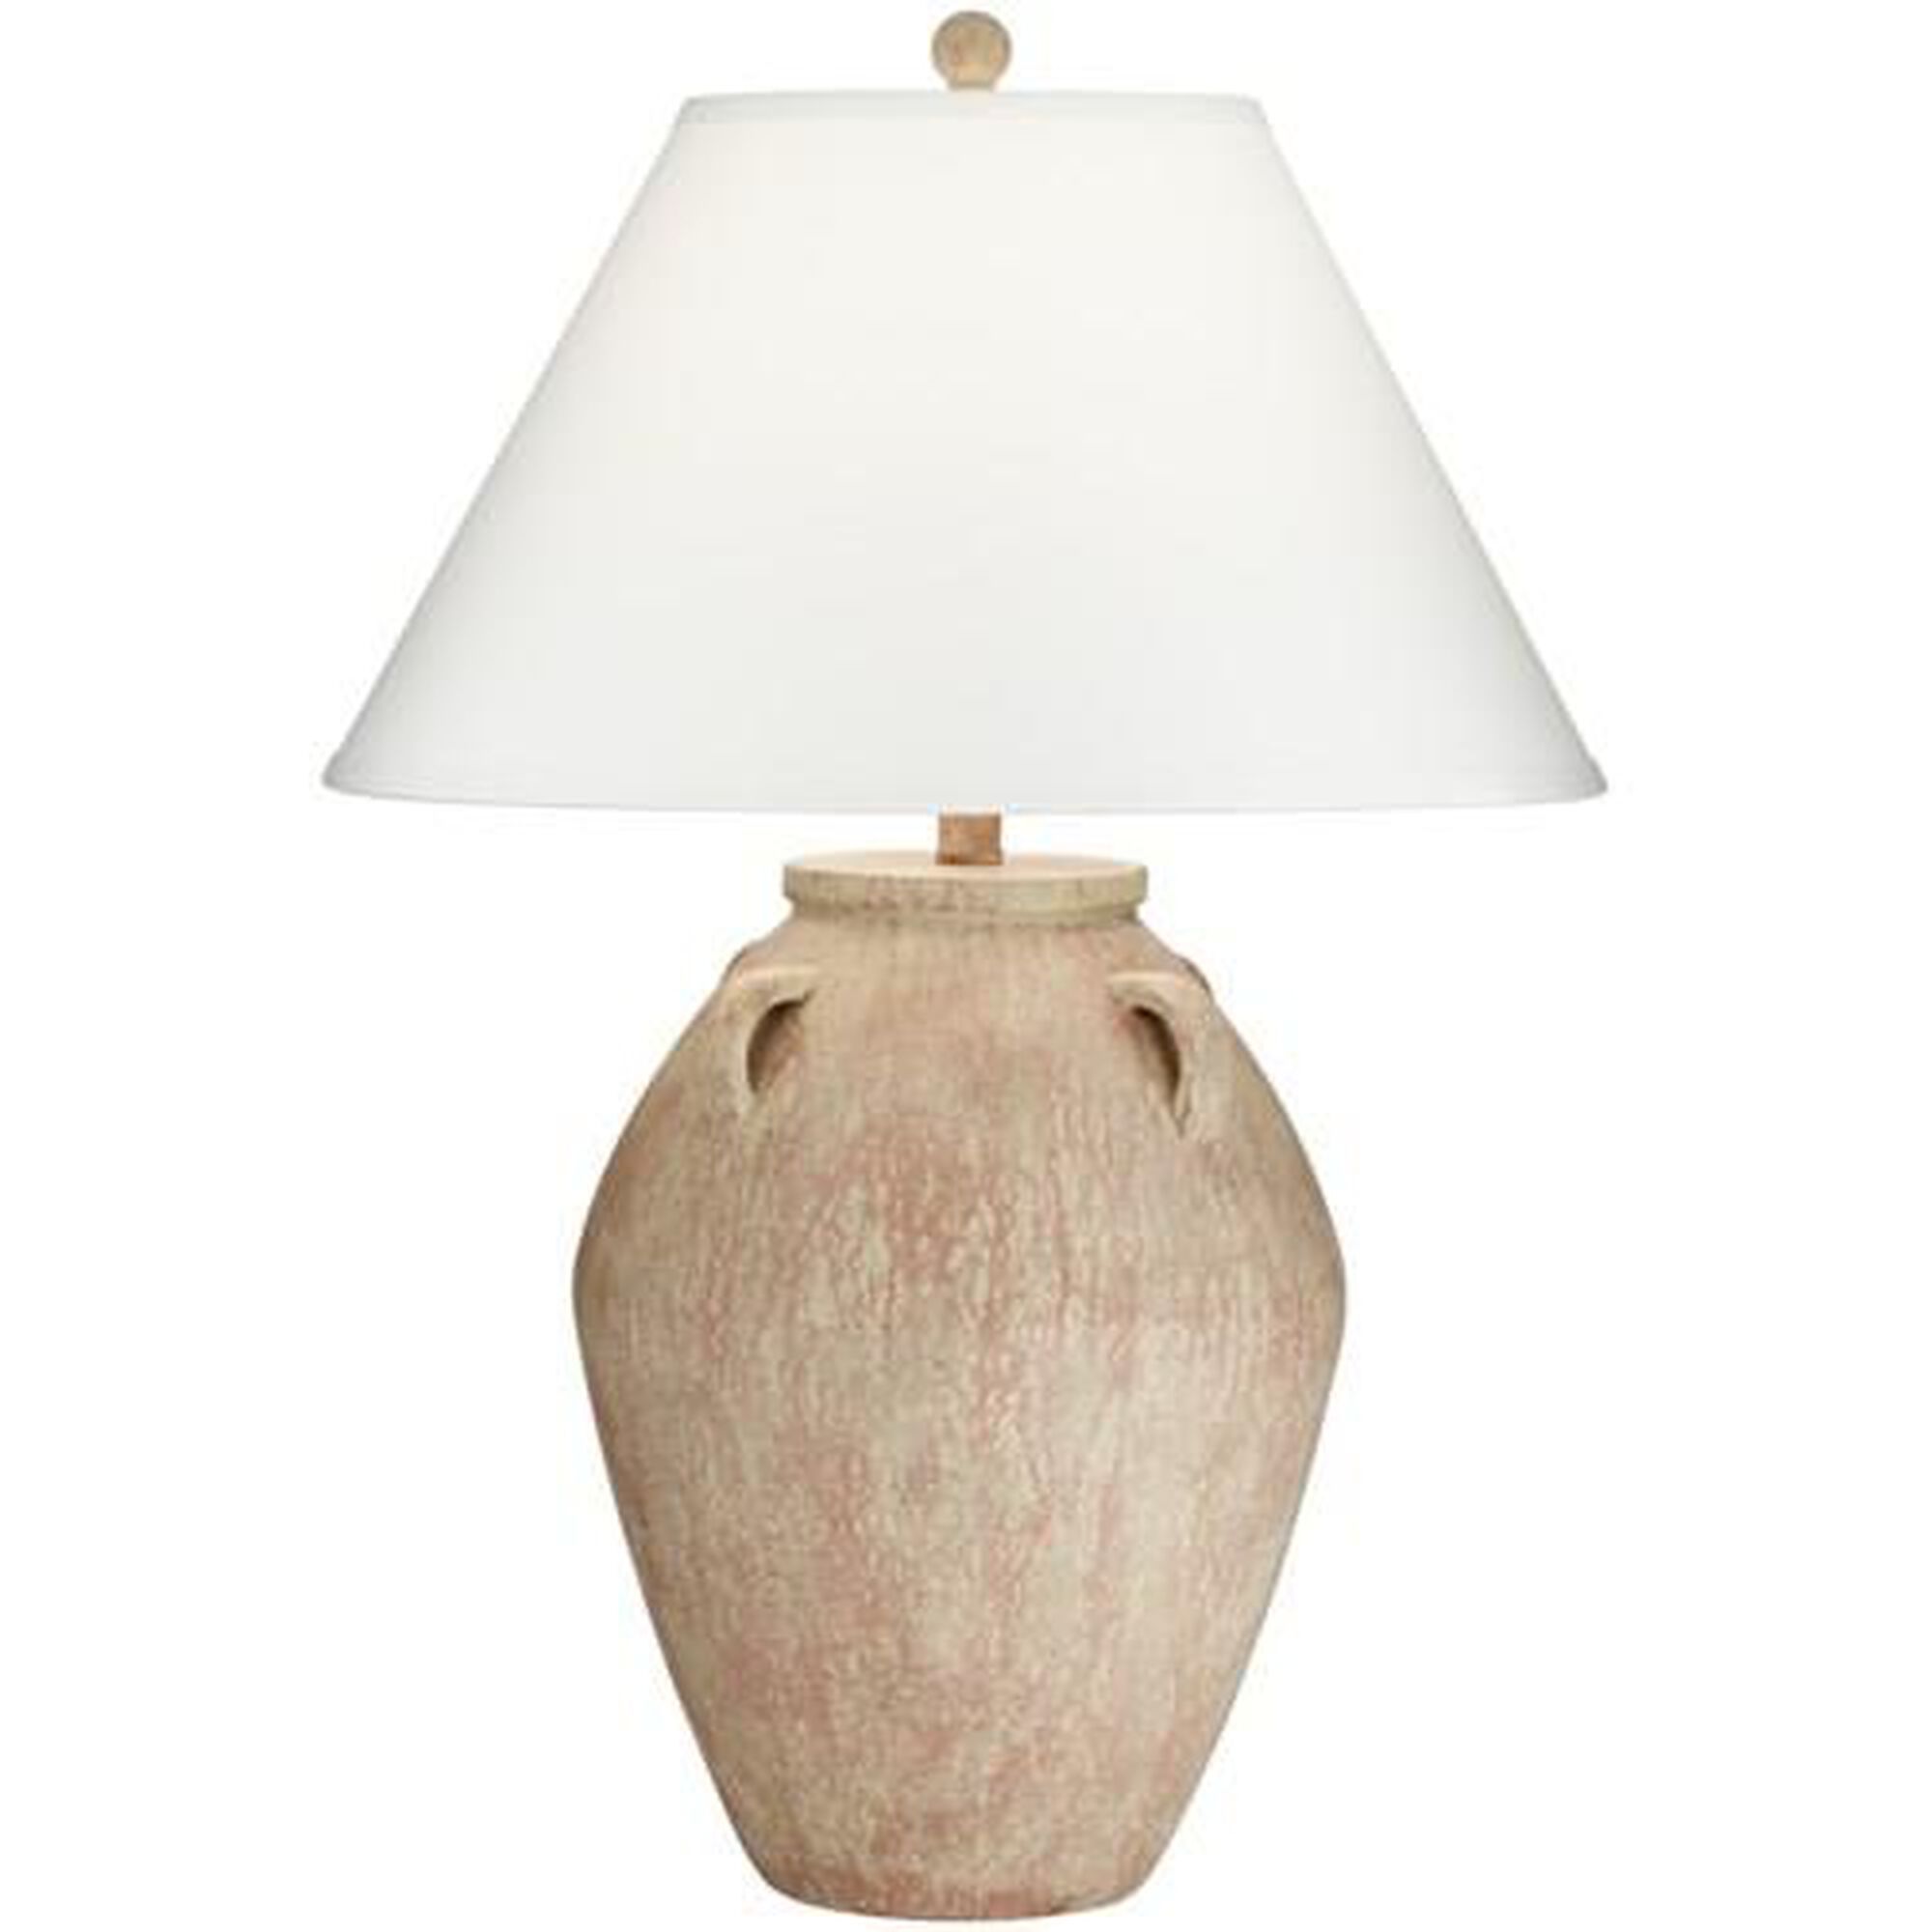 Ria 18 Inch Table Lamp by Pacific Coast Lighting | Capitol Lighting 1800lighting.com